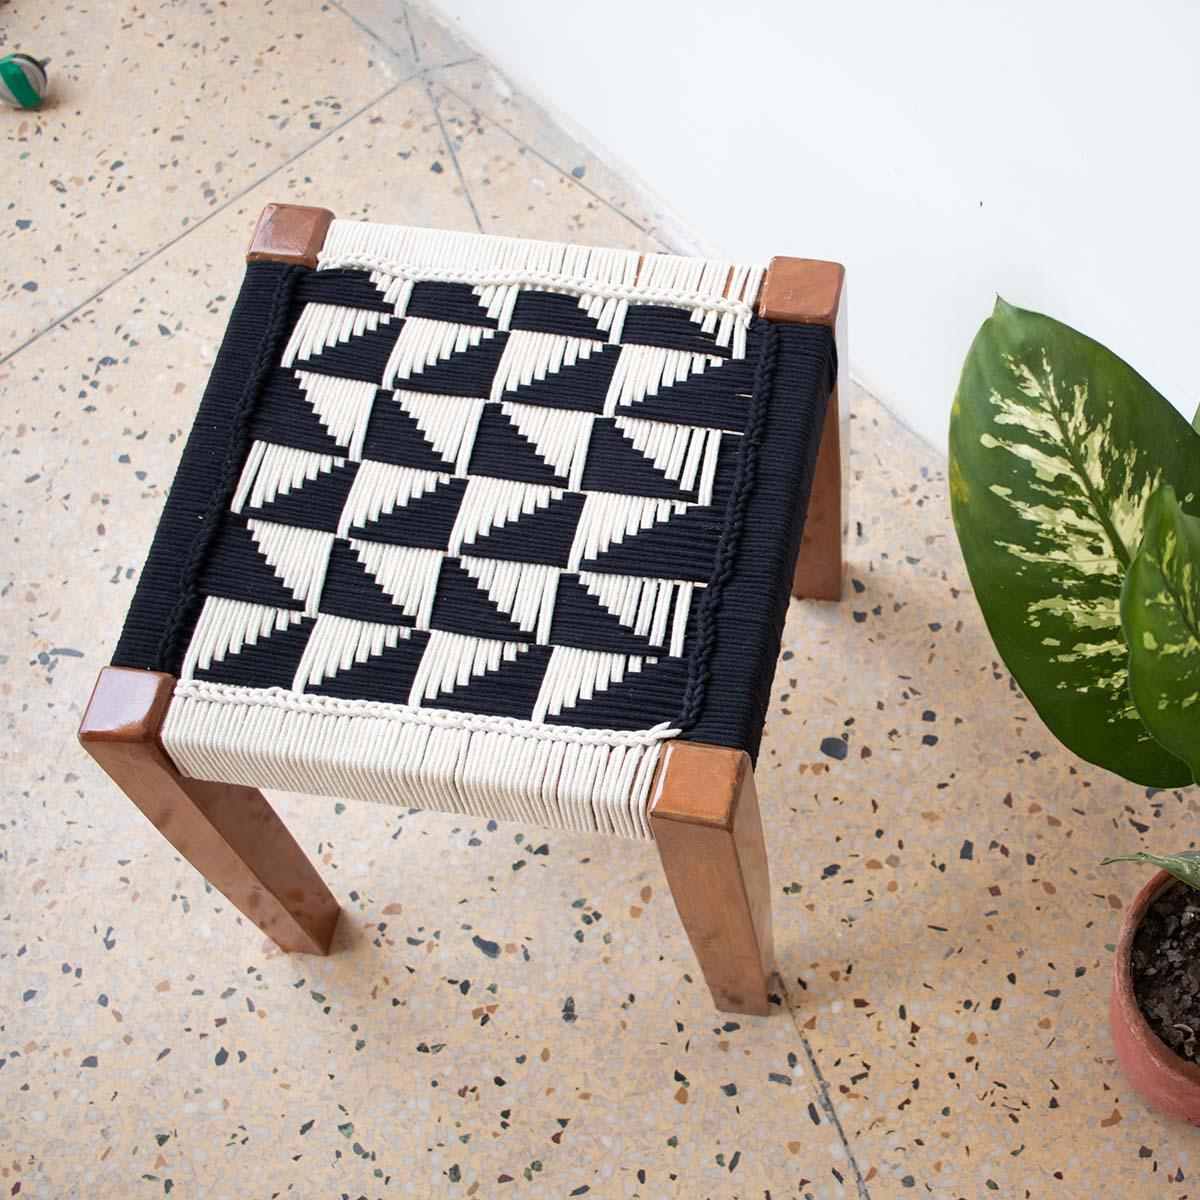 Every Room Cotton Stool 1.0 - Sirohi.org - Purpose_Indoor Seating, Rope Material_Recycled Cotton